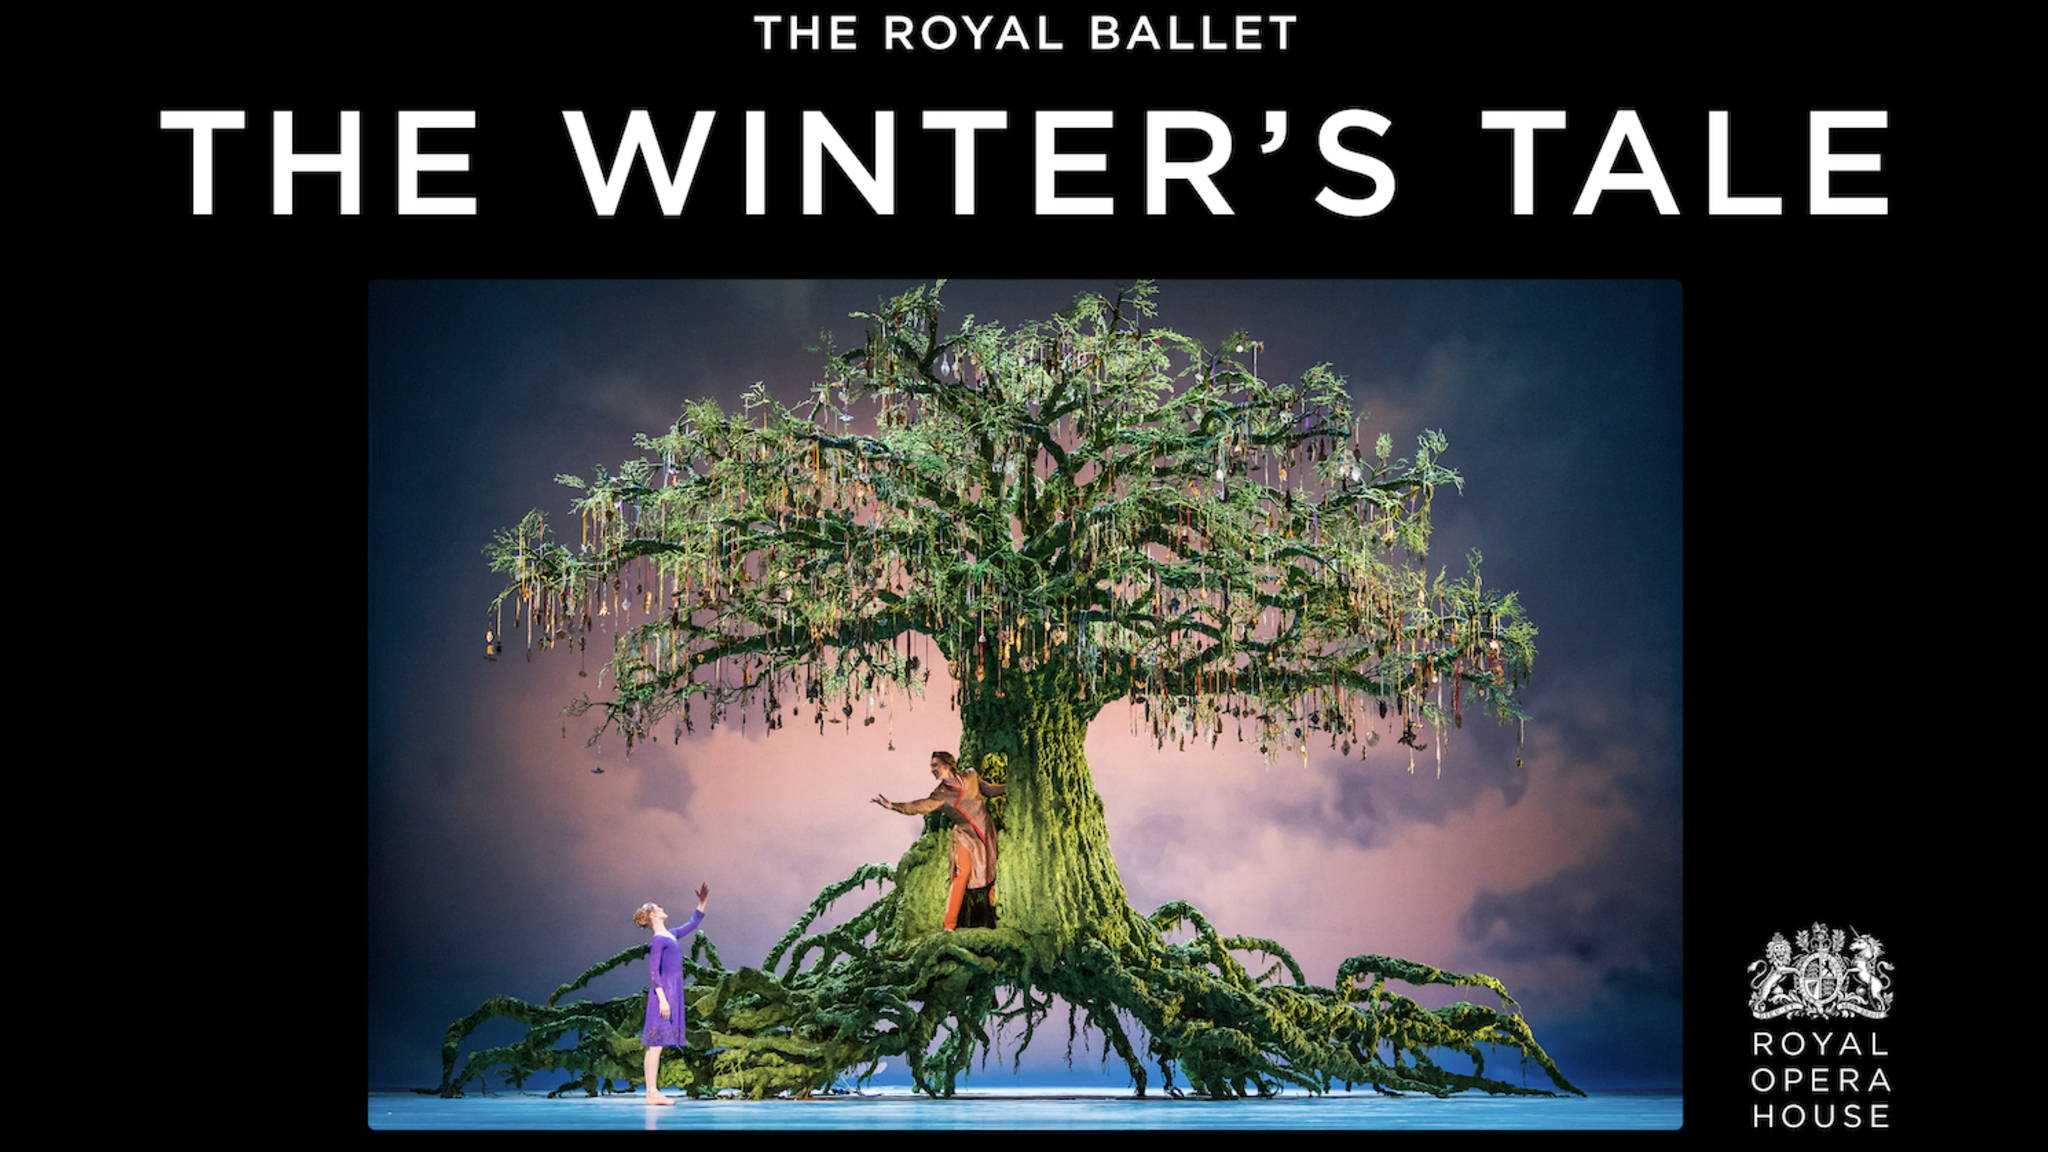 The Royal Ballet: The Winter's Tale